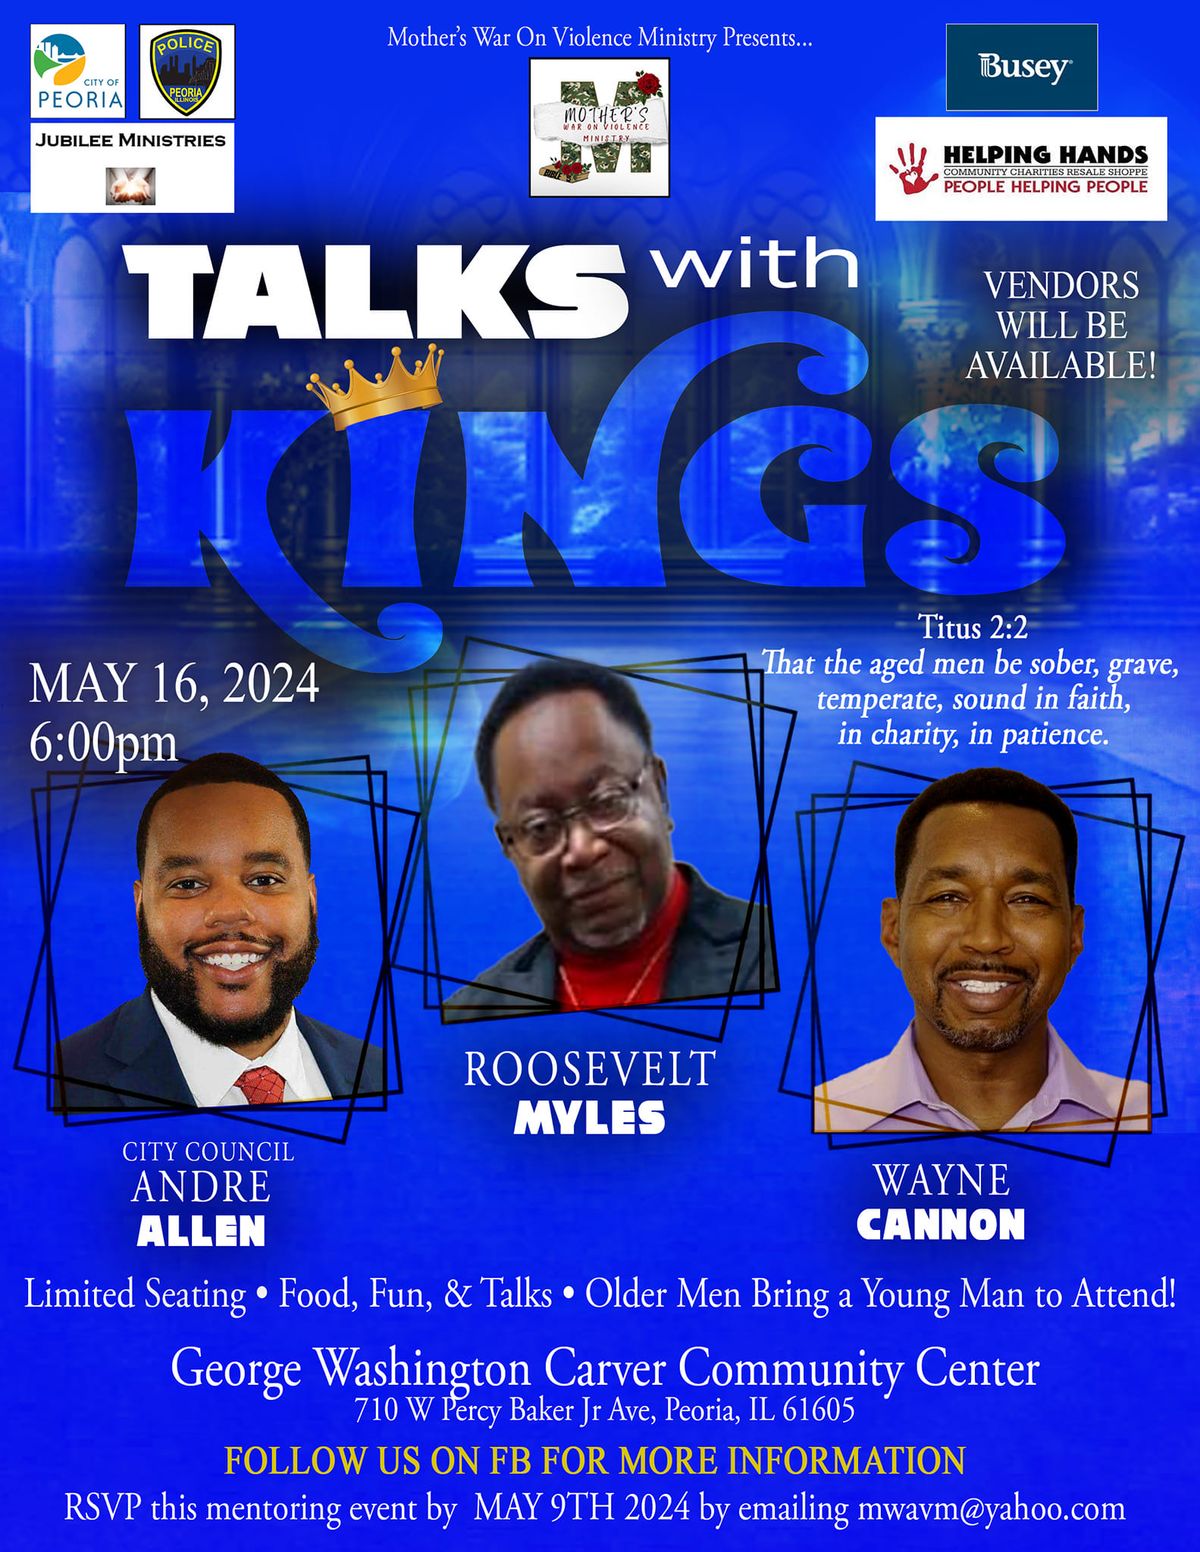 "Talks with Kings"